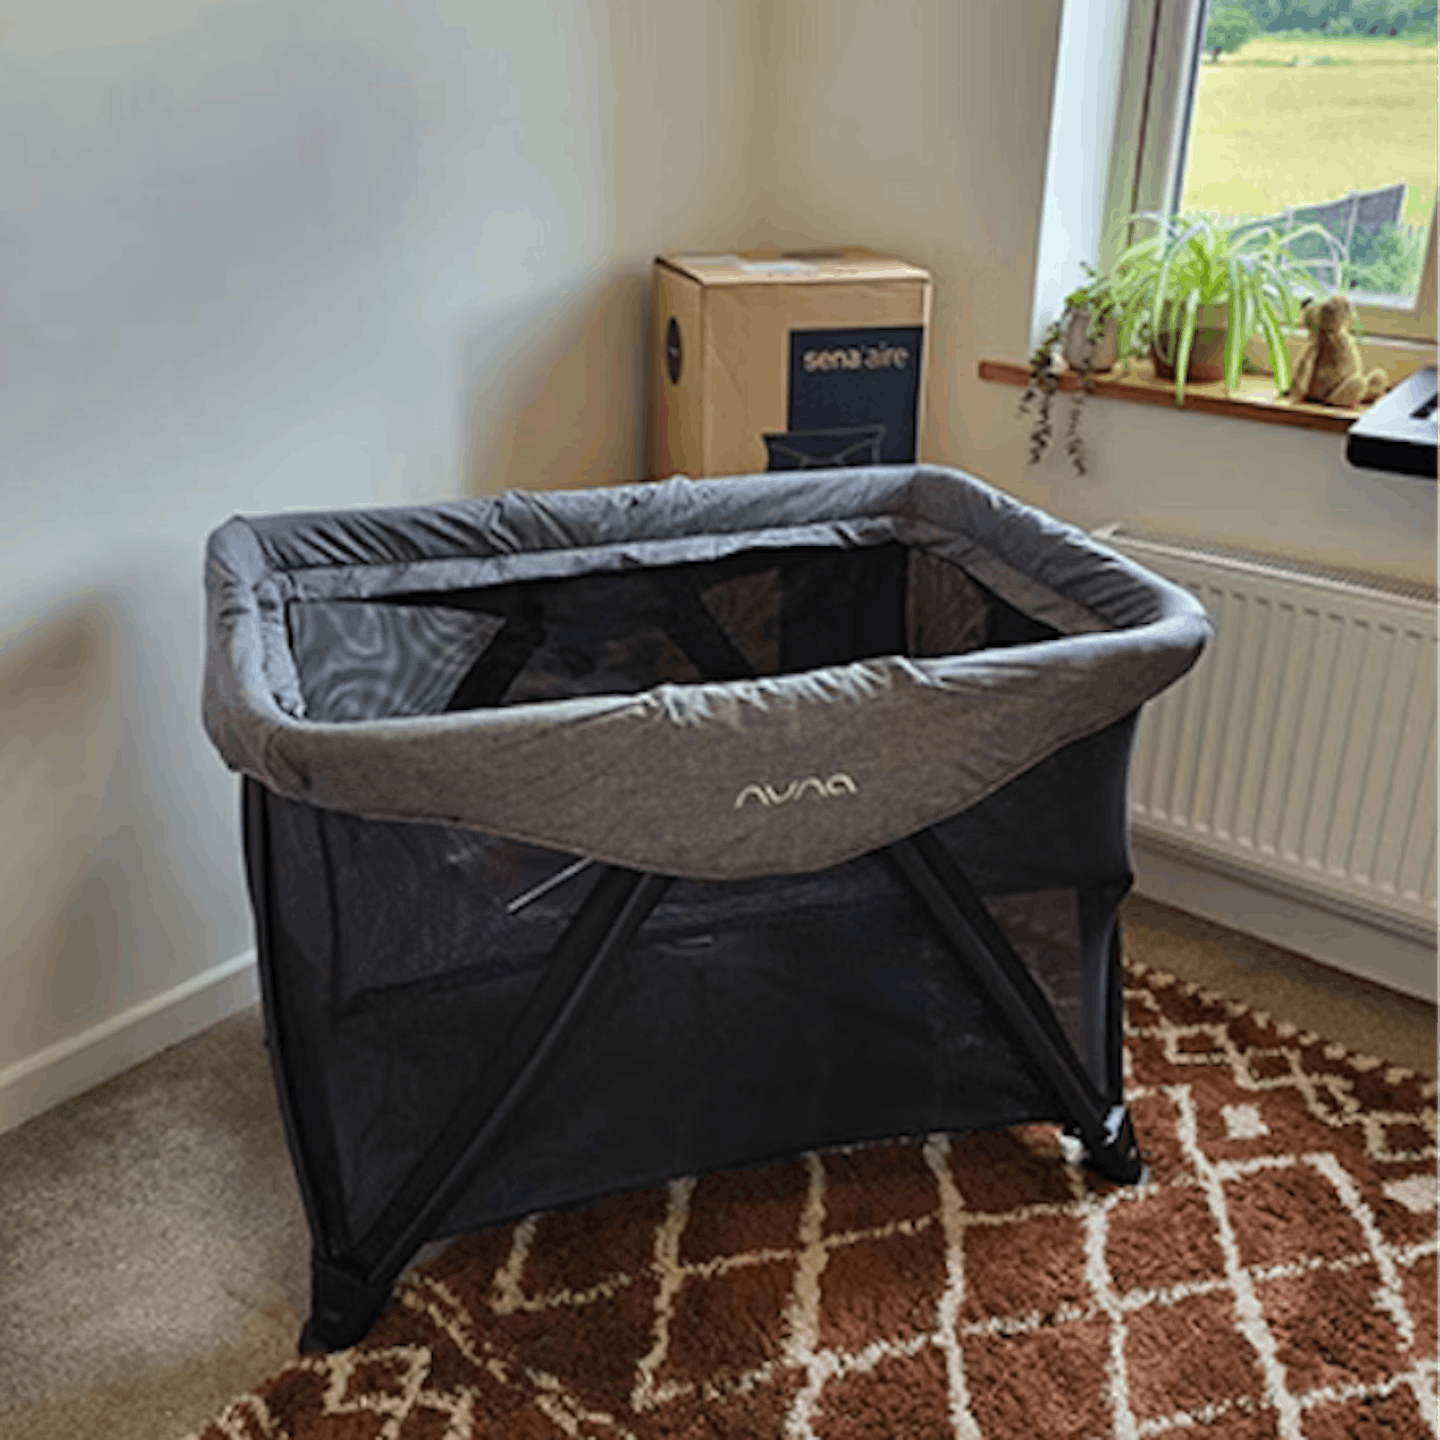 travel cot for babies reviews